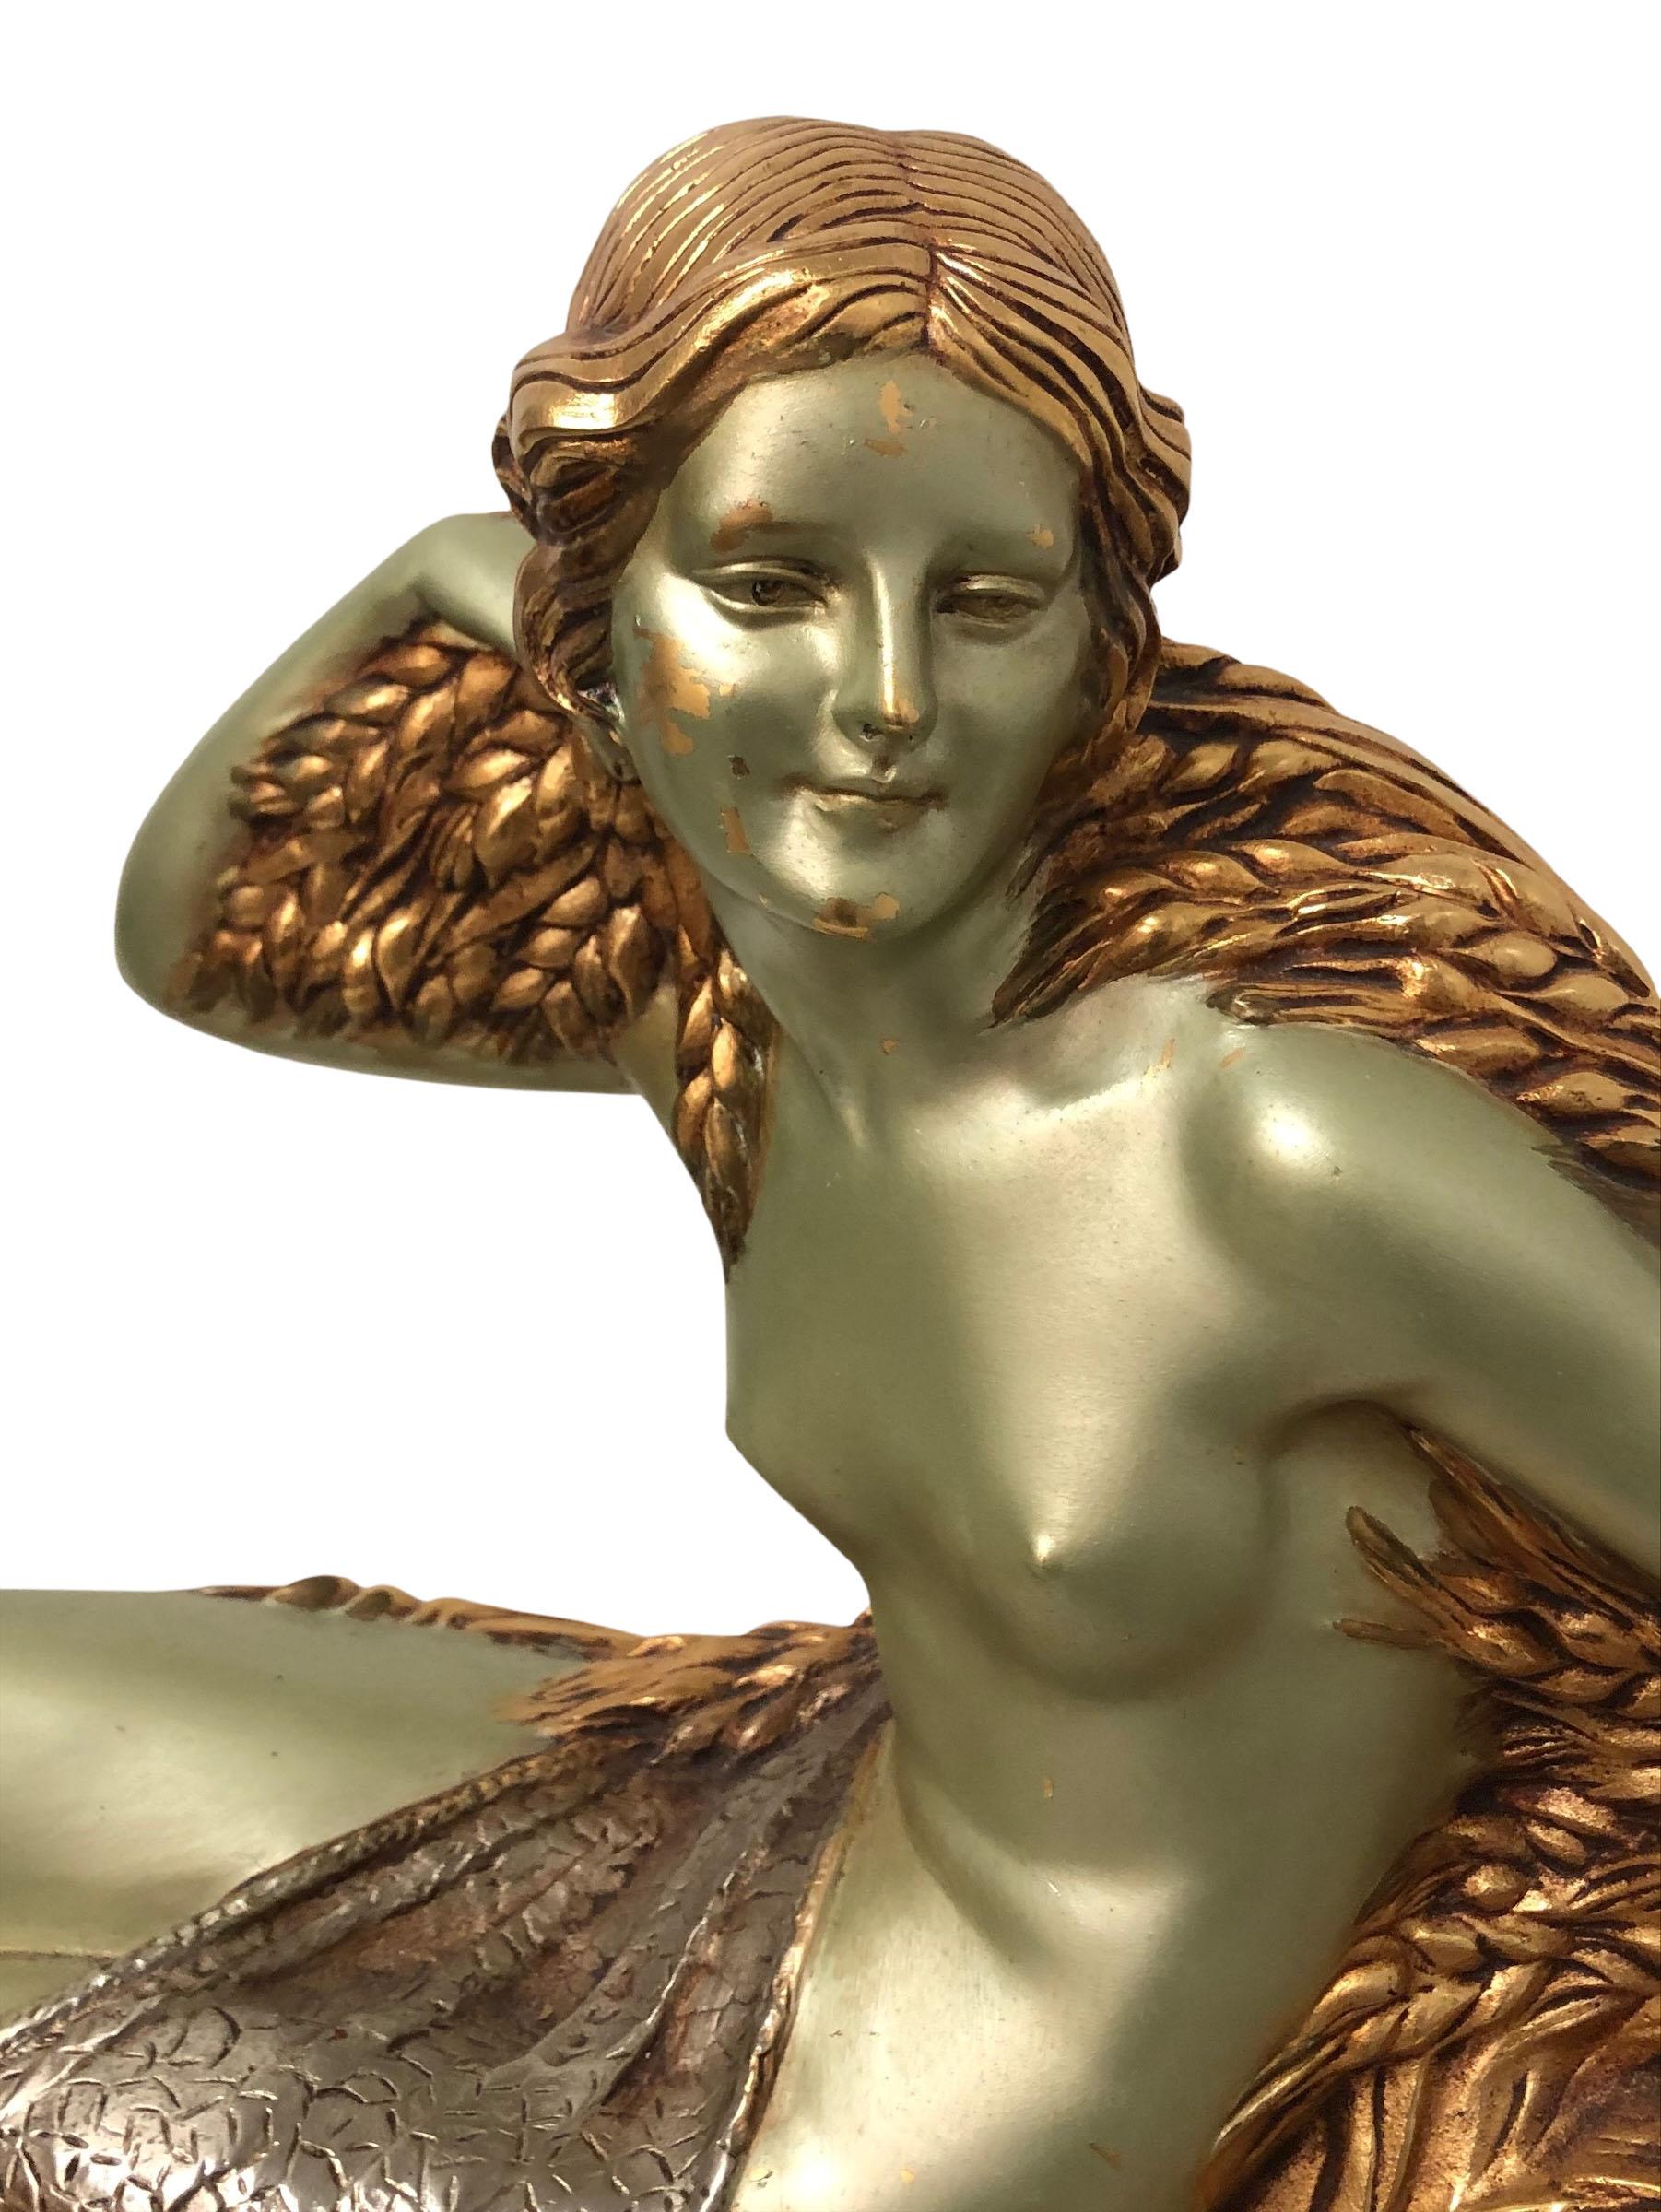 1920s solid bronze sculpture of a seated flapper girl. She is solid bronze with a gold and silver and green patina on a marble base. Signed by the artist, Demetre Chiparus. The marble is Beige with a pink cast to it.

Romanian artist Demetre